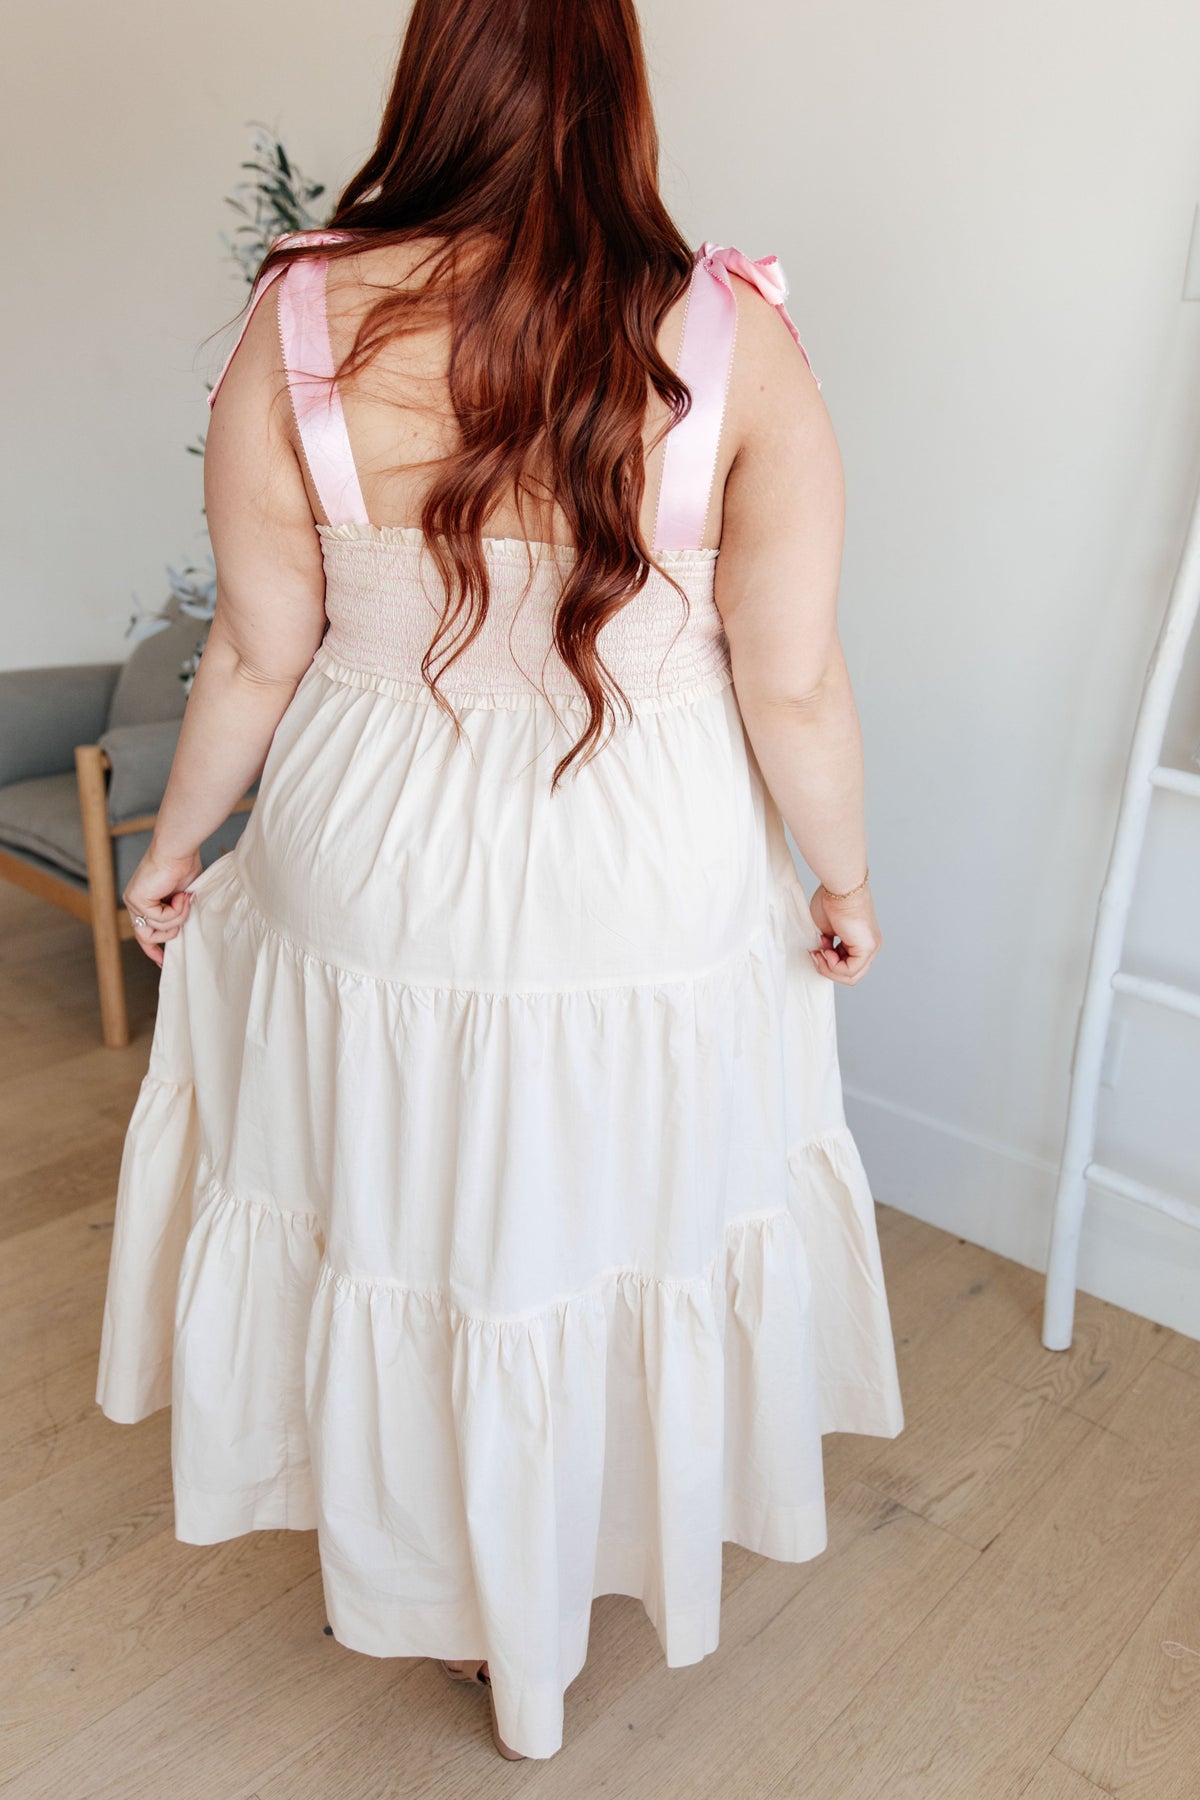 Truly Scrumptious Tiered Dress (Ave)